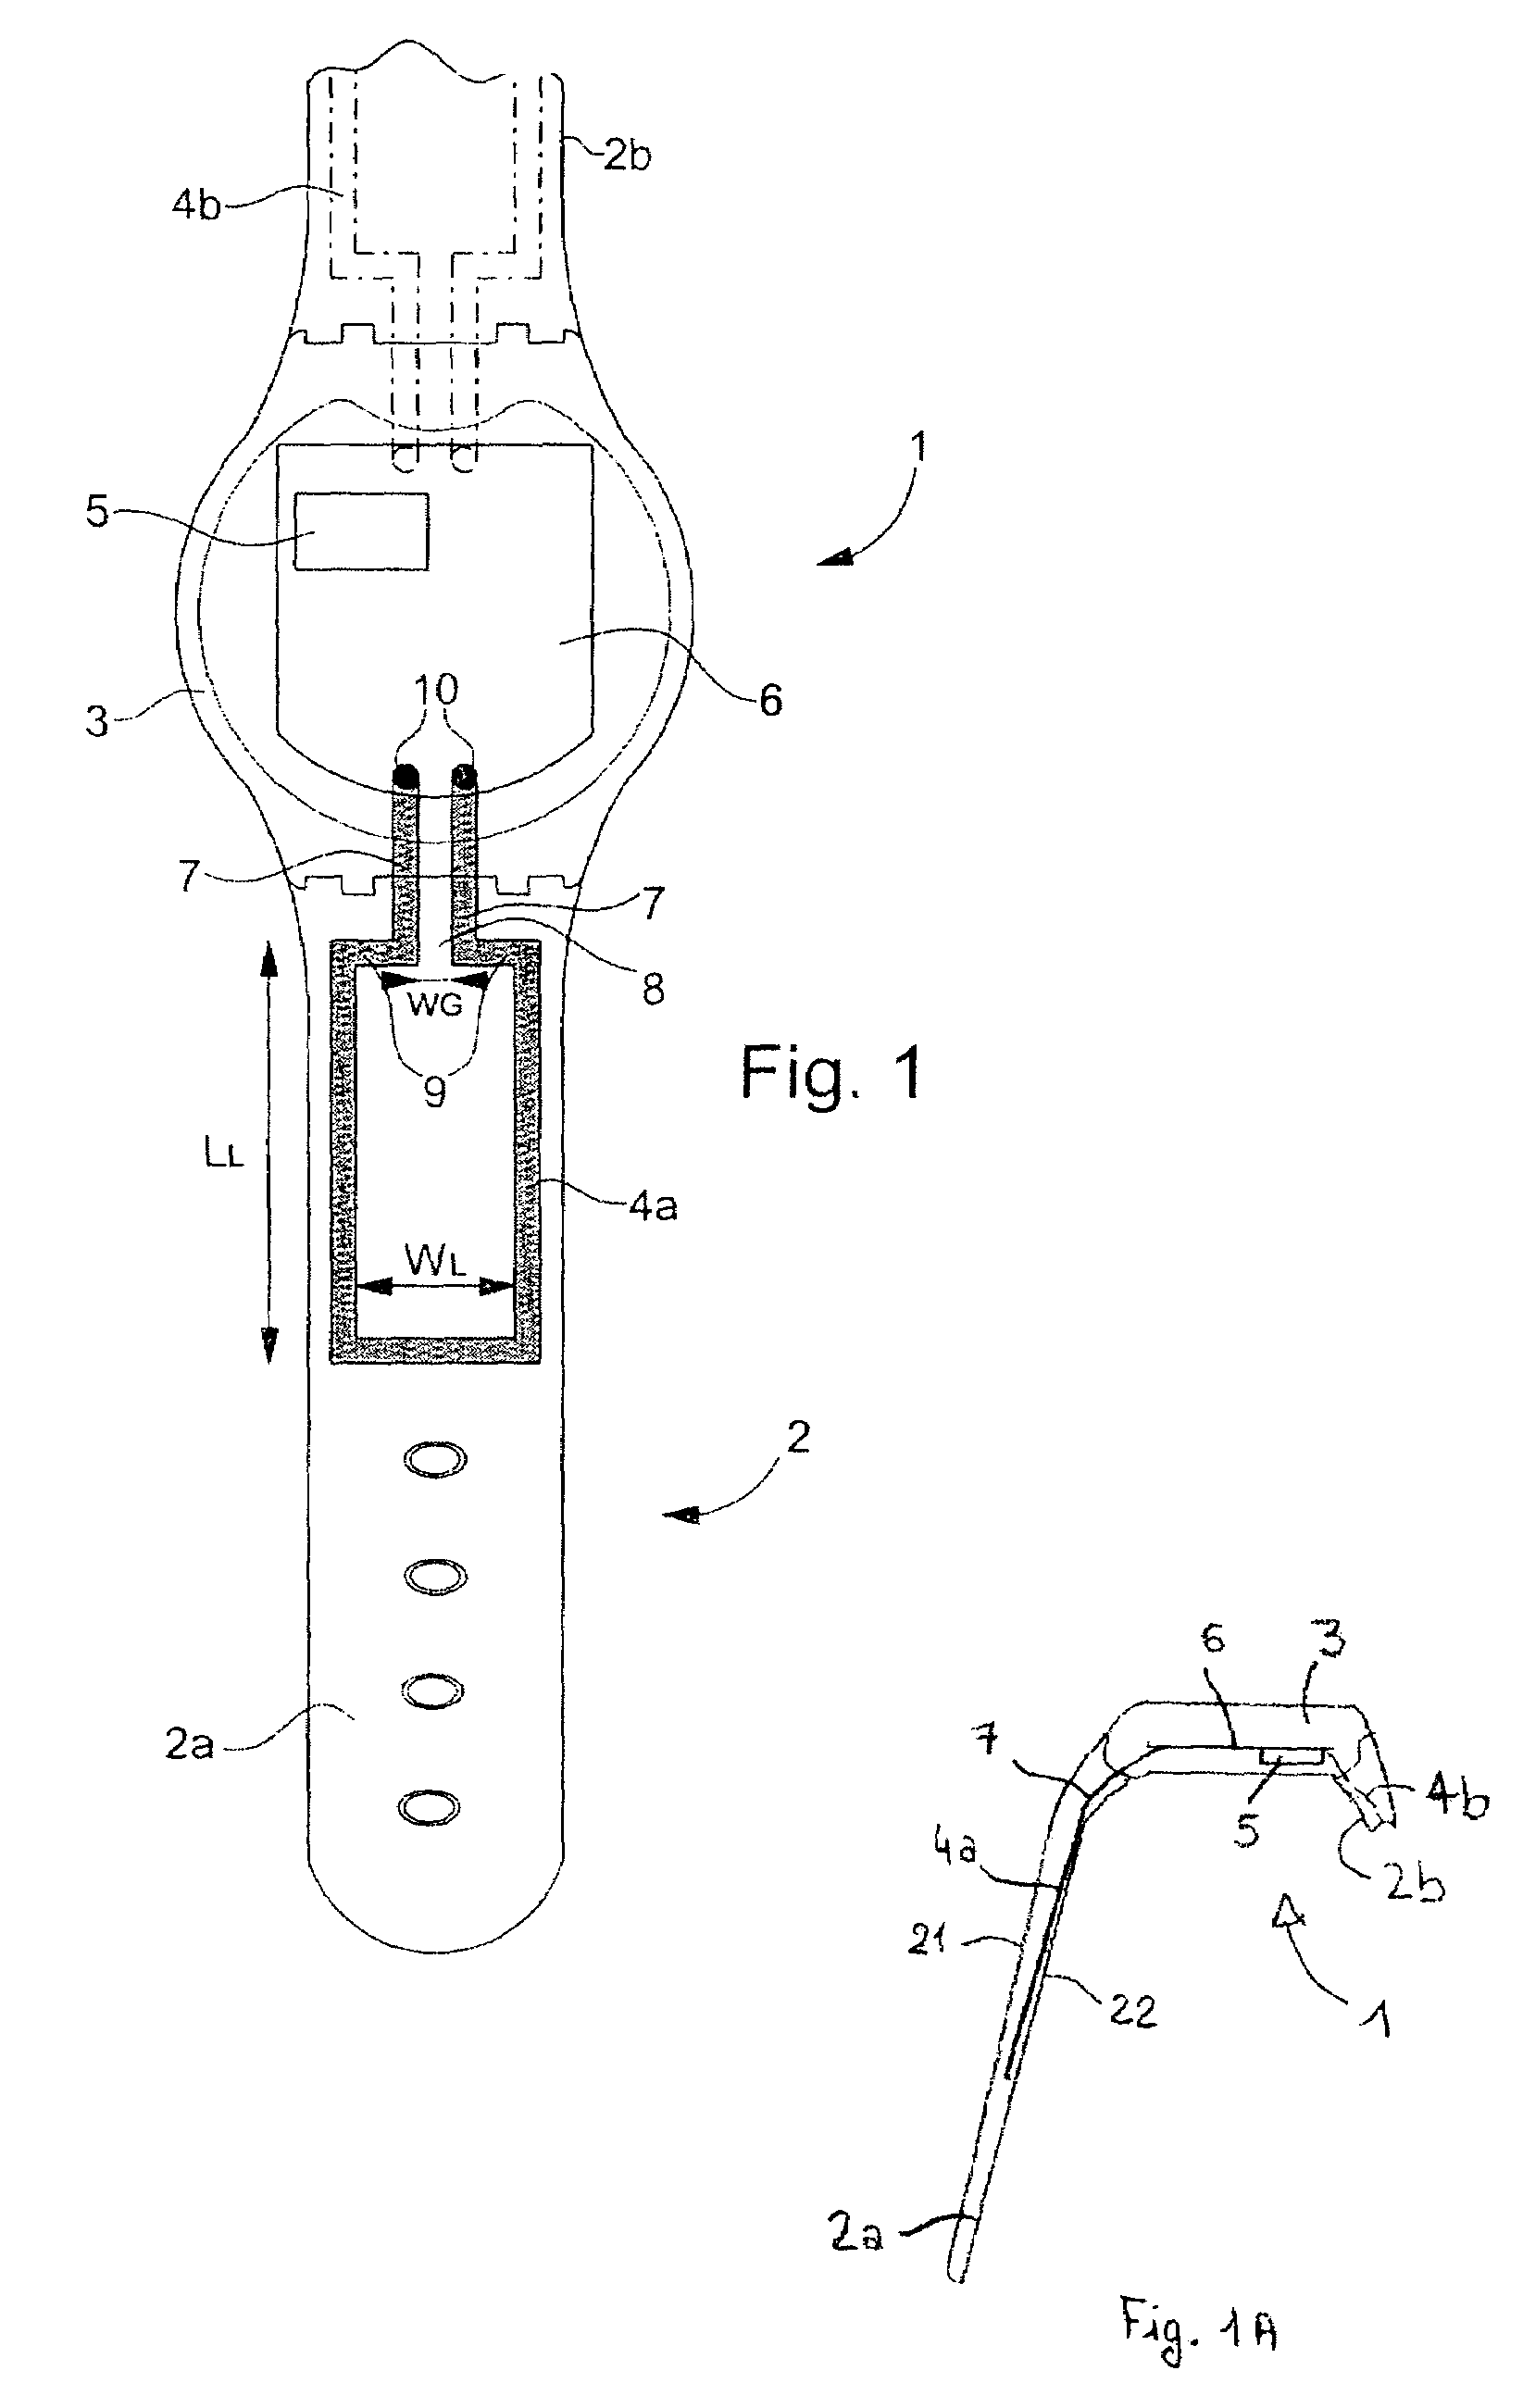 Optimization of a loop antenna geometry embedded in a wristband portion of a watch